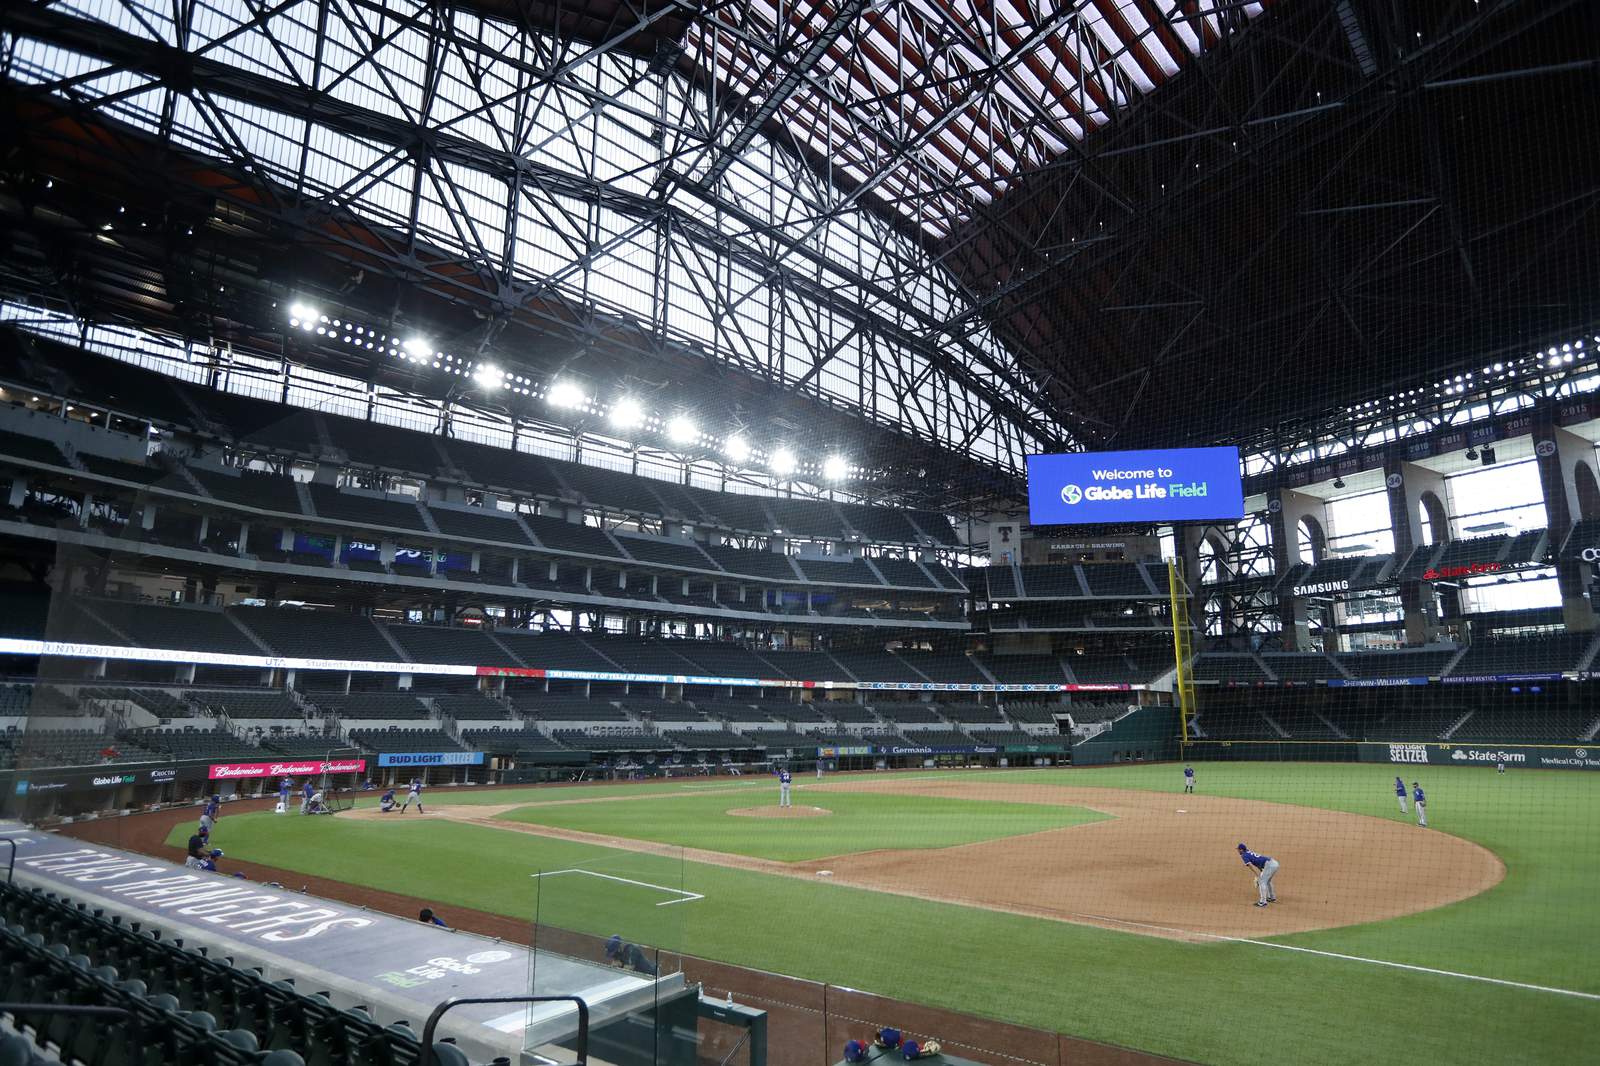 With empty new stadium, Rangers furlough about 60 employees